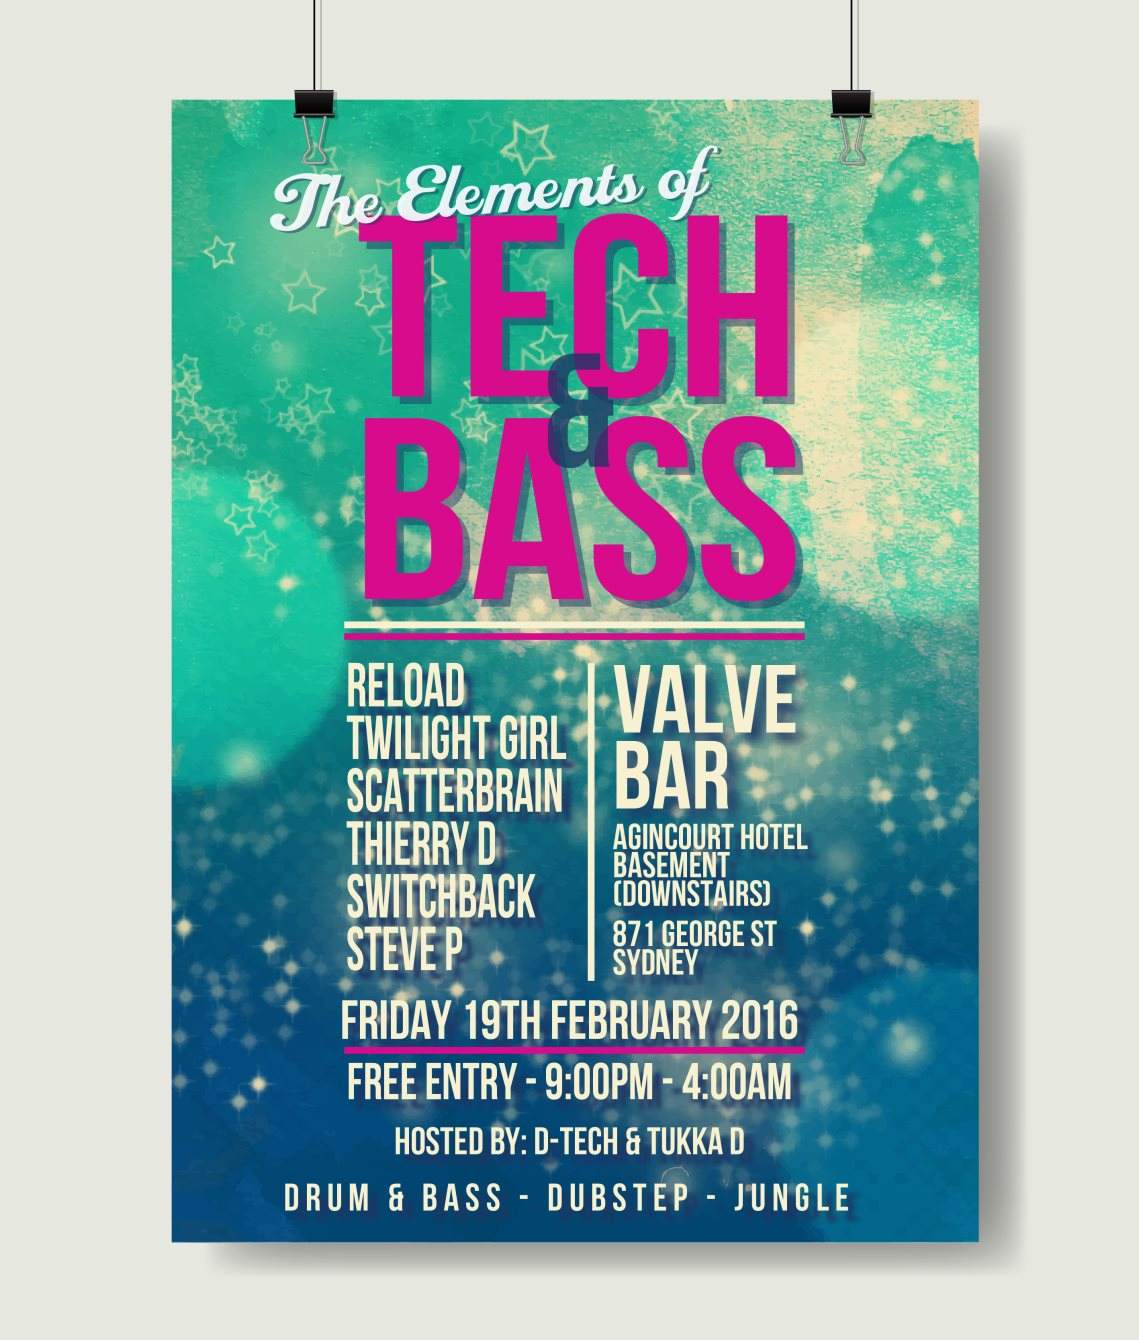 The Elements Of Tech & Bass .: Free Entry : - Página trasera